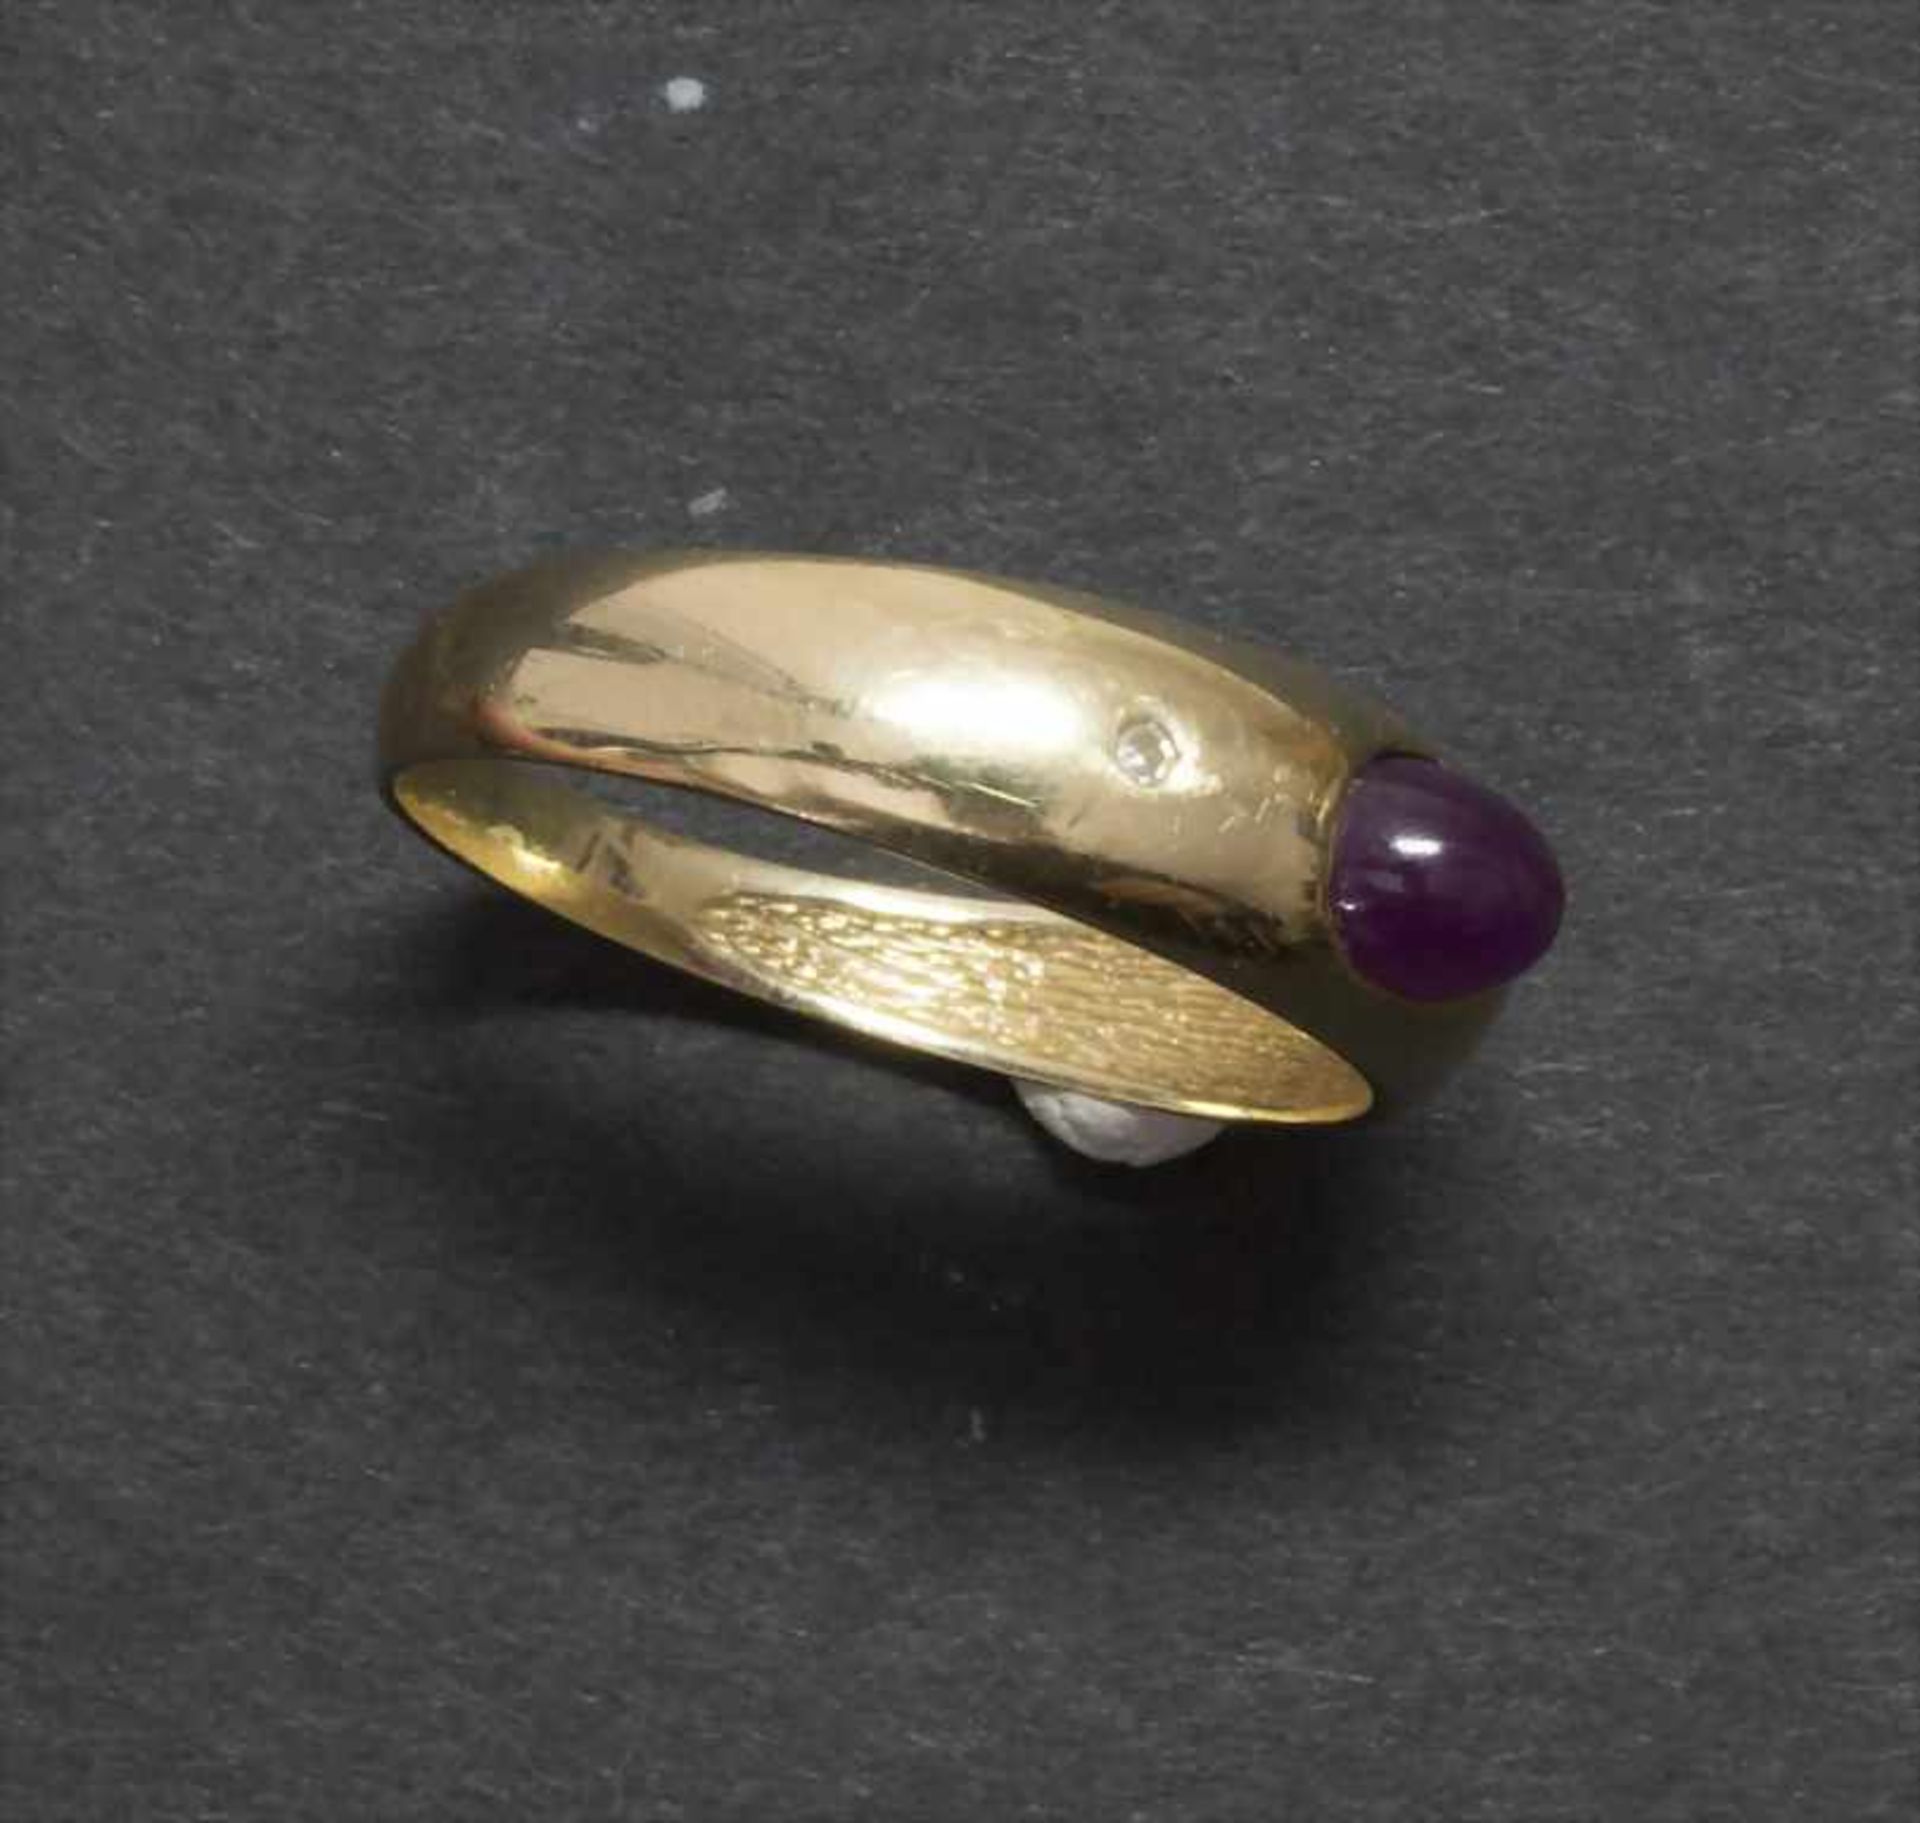 Damenring mit Rubin Cabochon / A ladies ring with ruby cabochonMaterial: Gelbgold 8 Kt. 333/000,